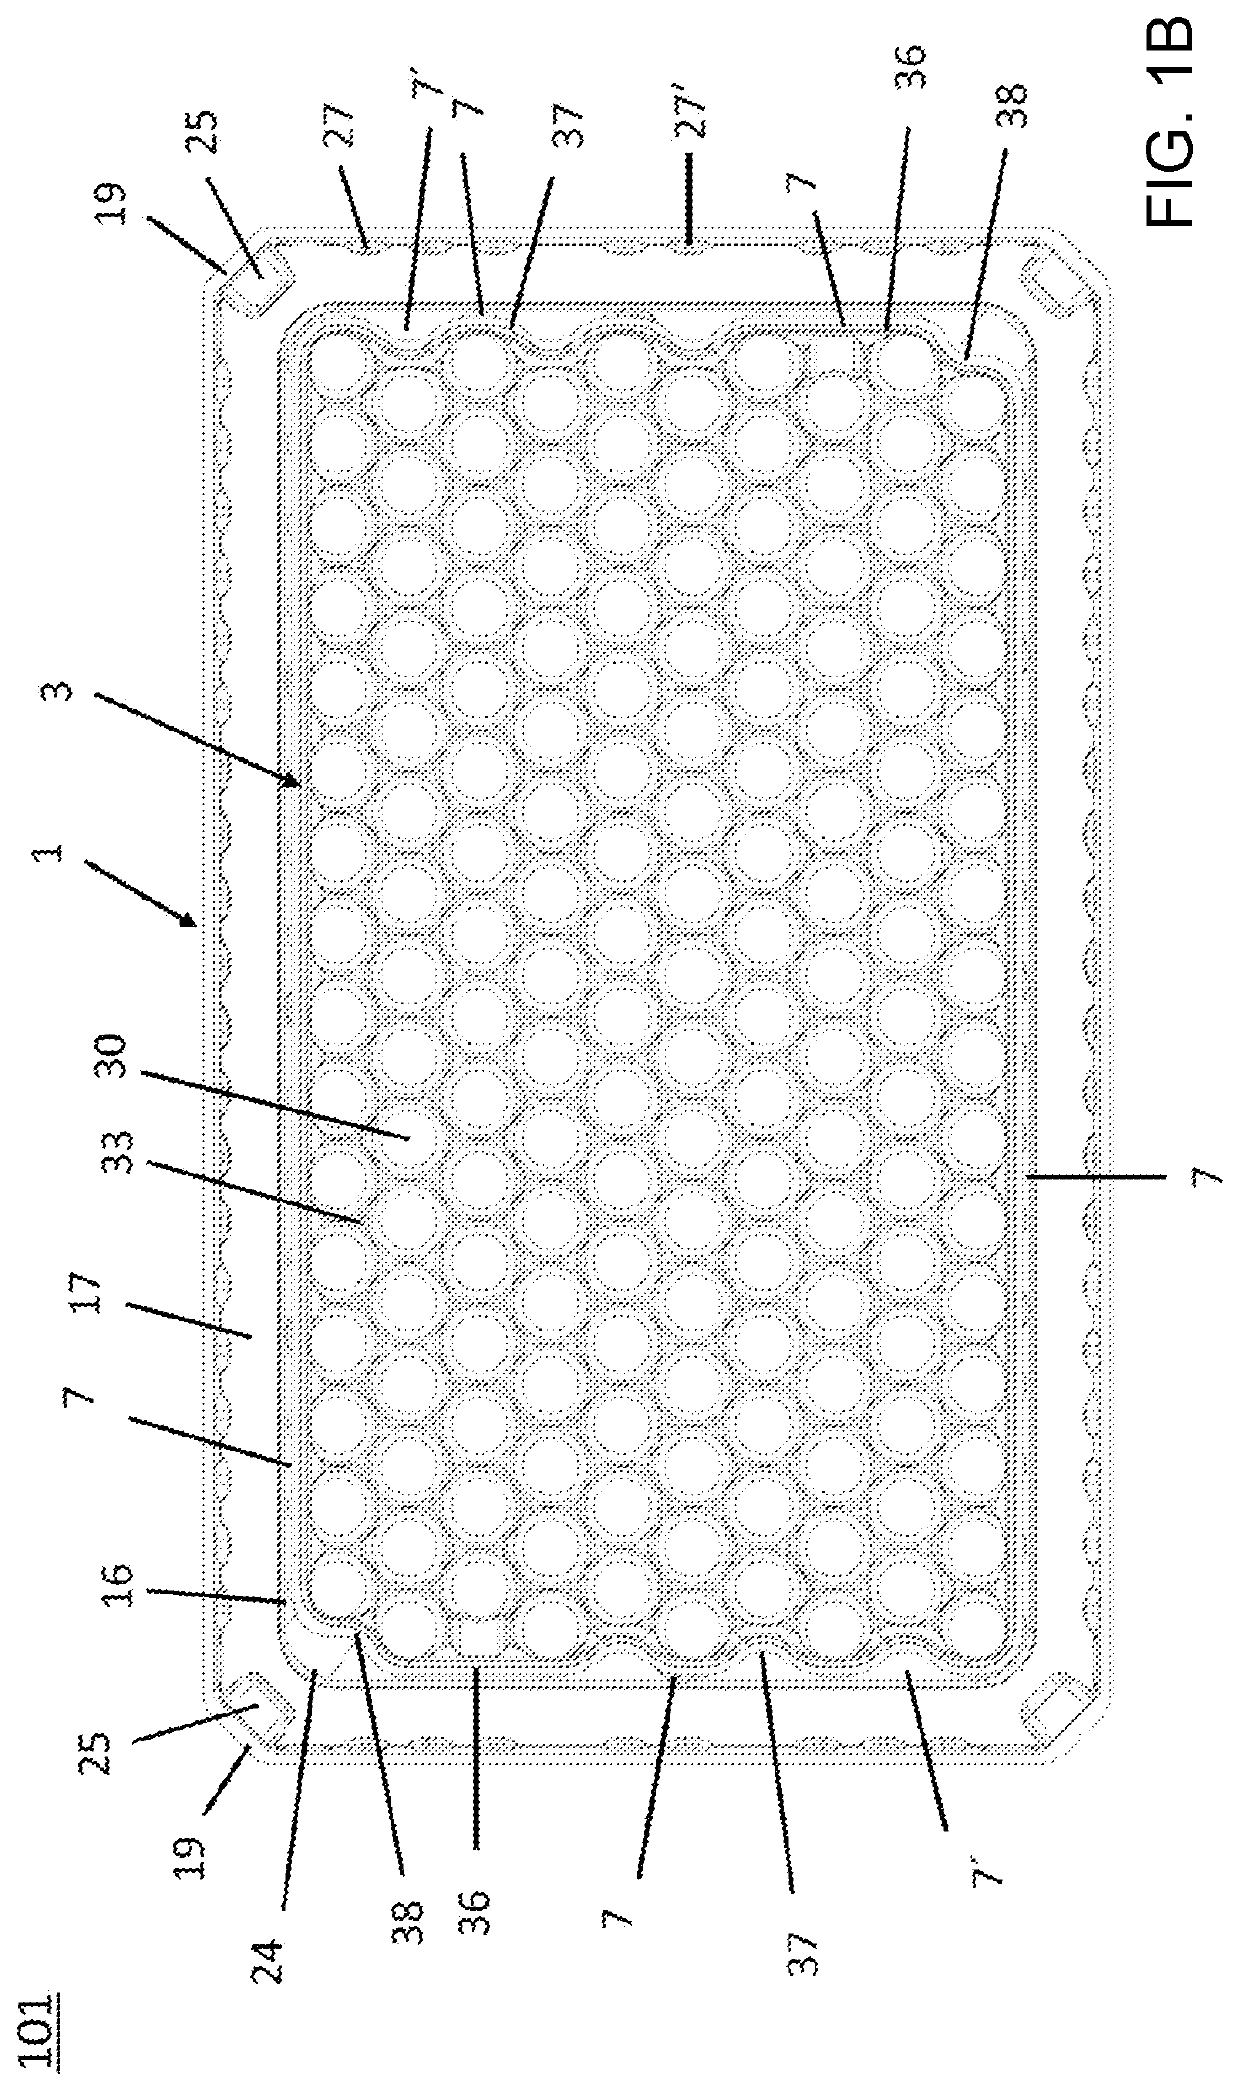 Transport unit and packaging structure for transporting and storing a plurality of containers for substances for pharmaceutical, medical or cosmetic uses